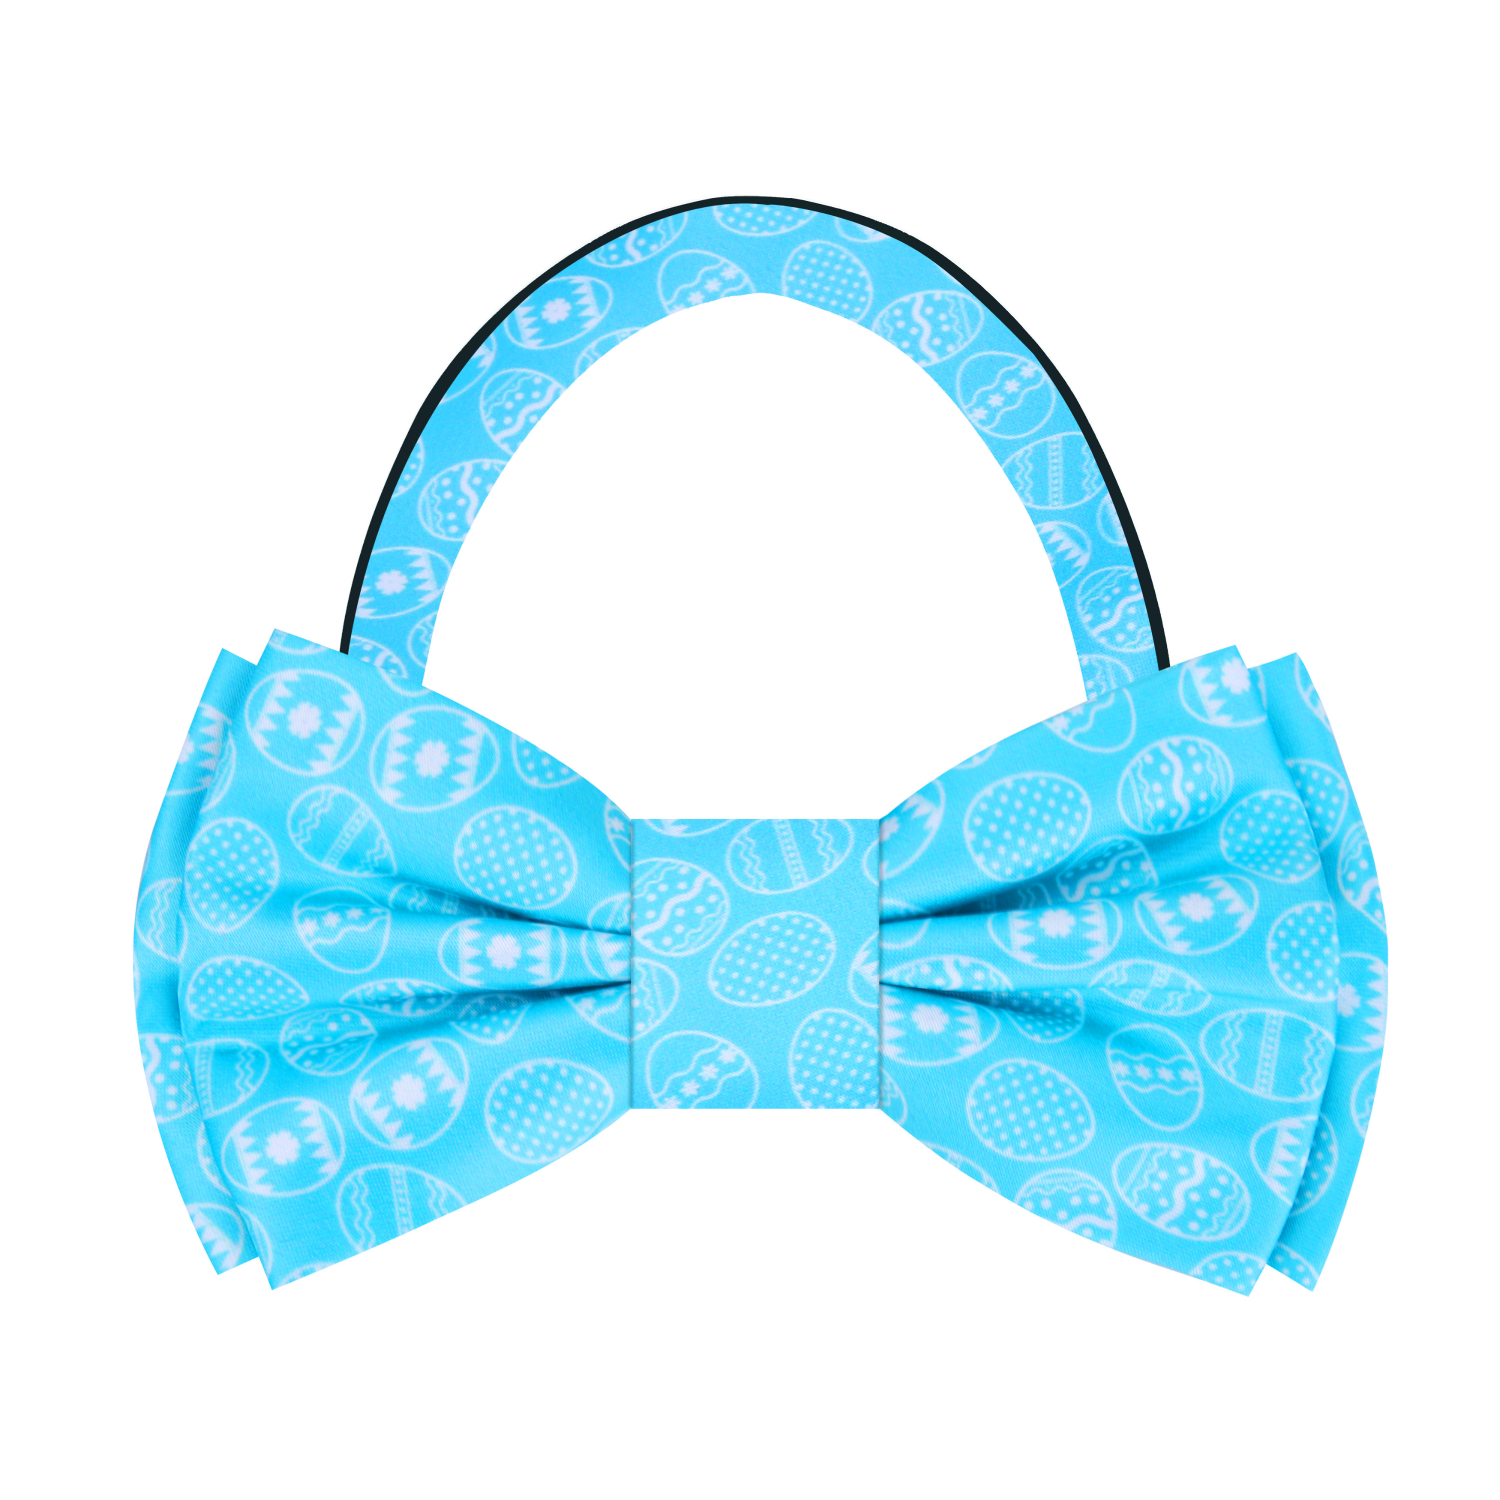 Bright Blue Easter Eggs Bow Tie Pre Tied